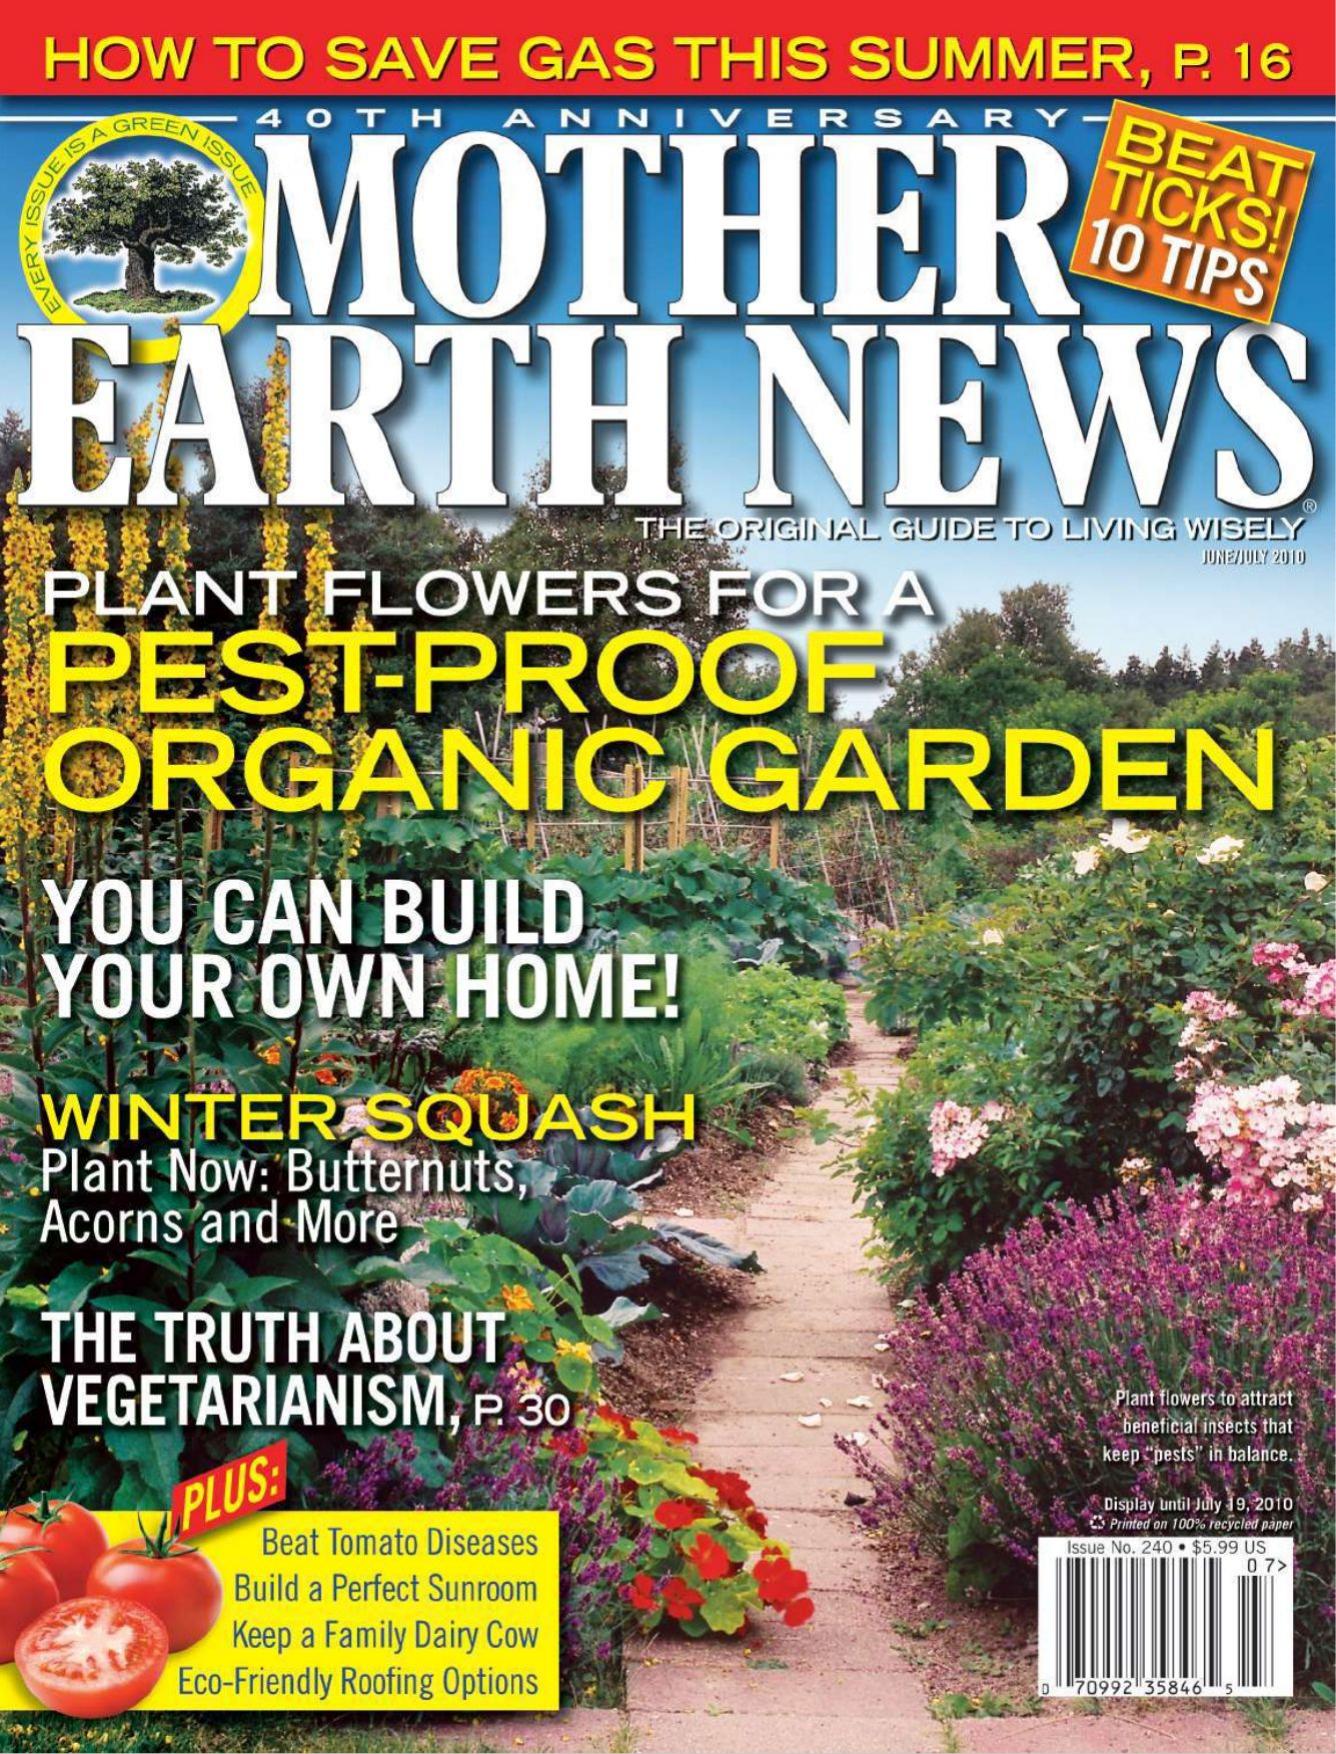 [Bryan Welch] Mother Earth News Magazine